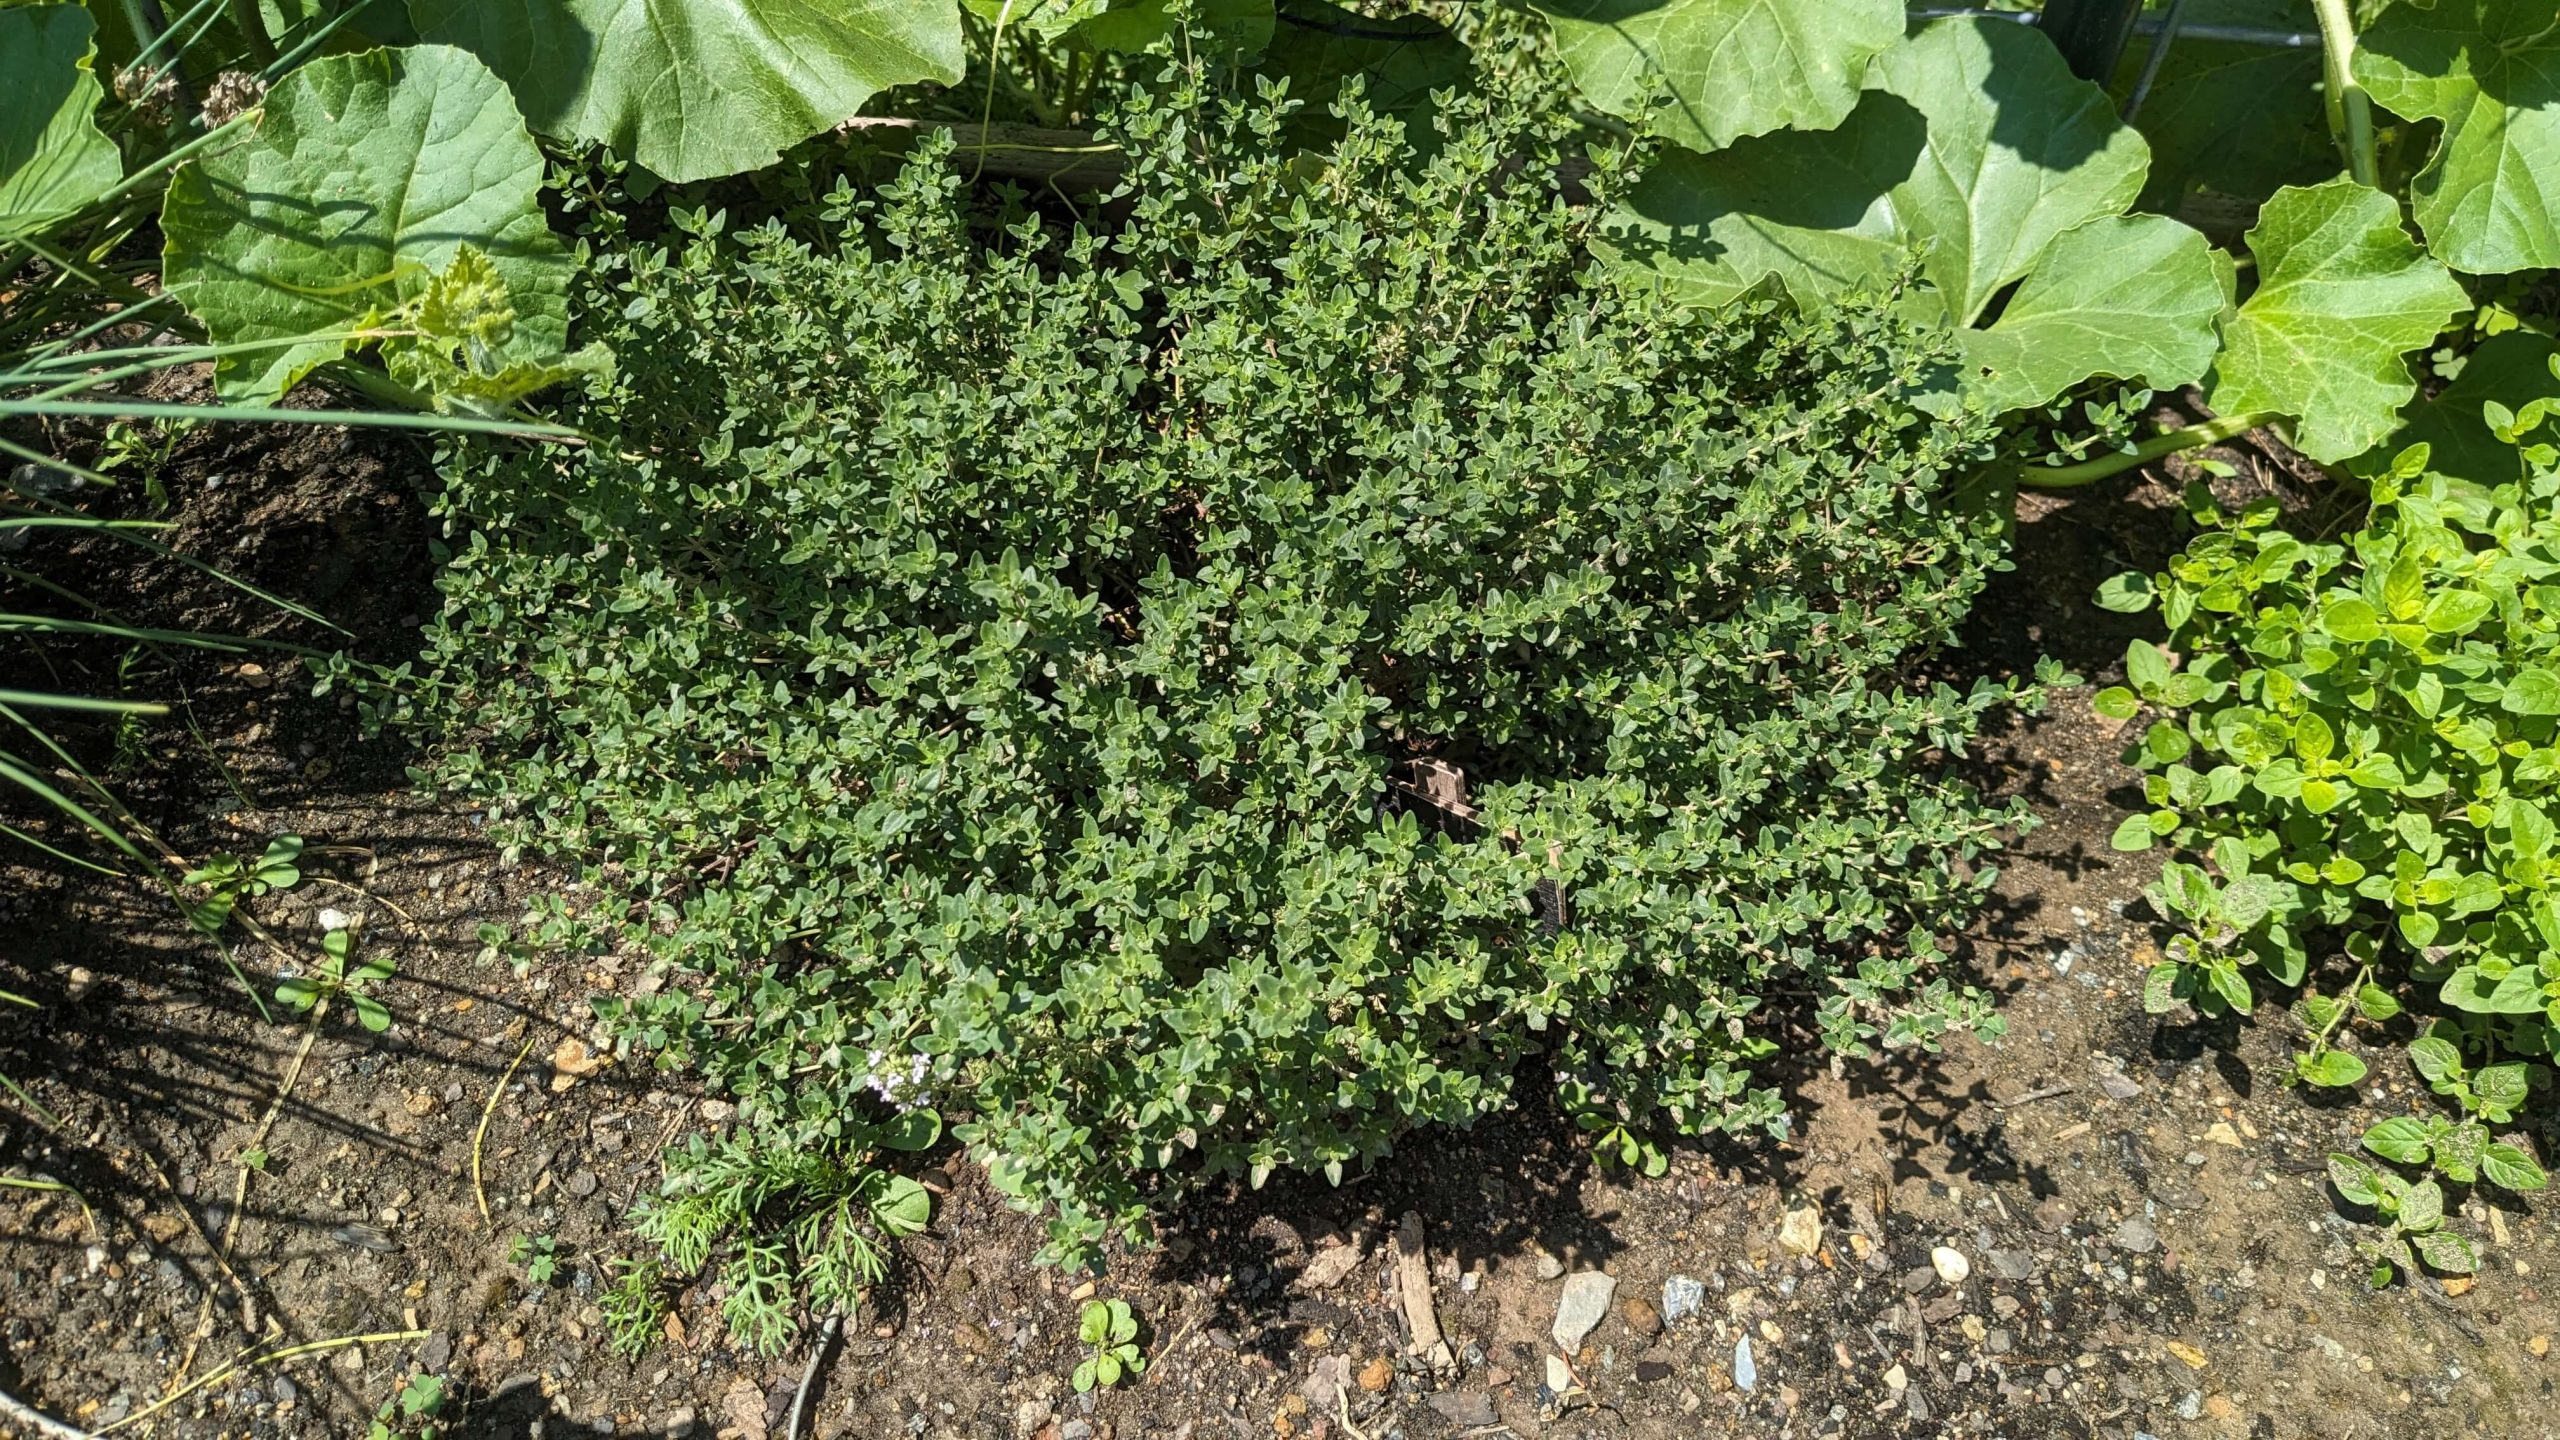 thyme plant in the garden surrounded by squash leaves and other herbs